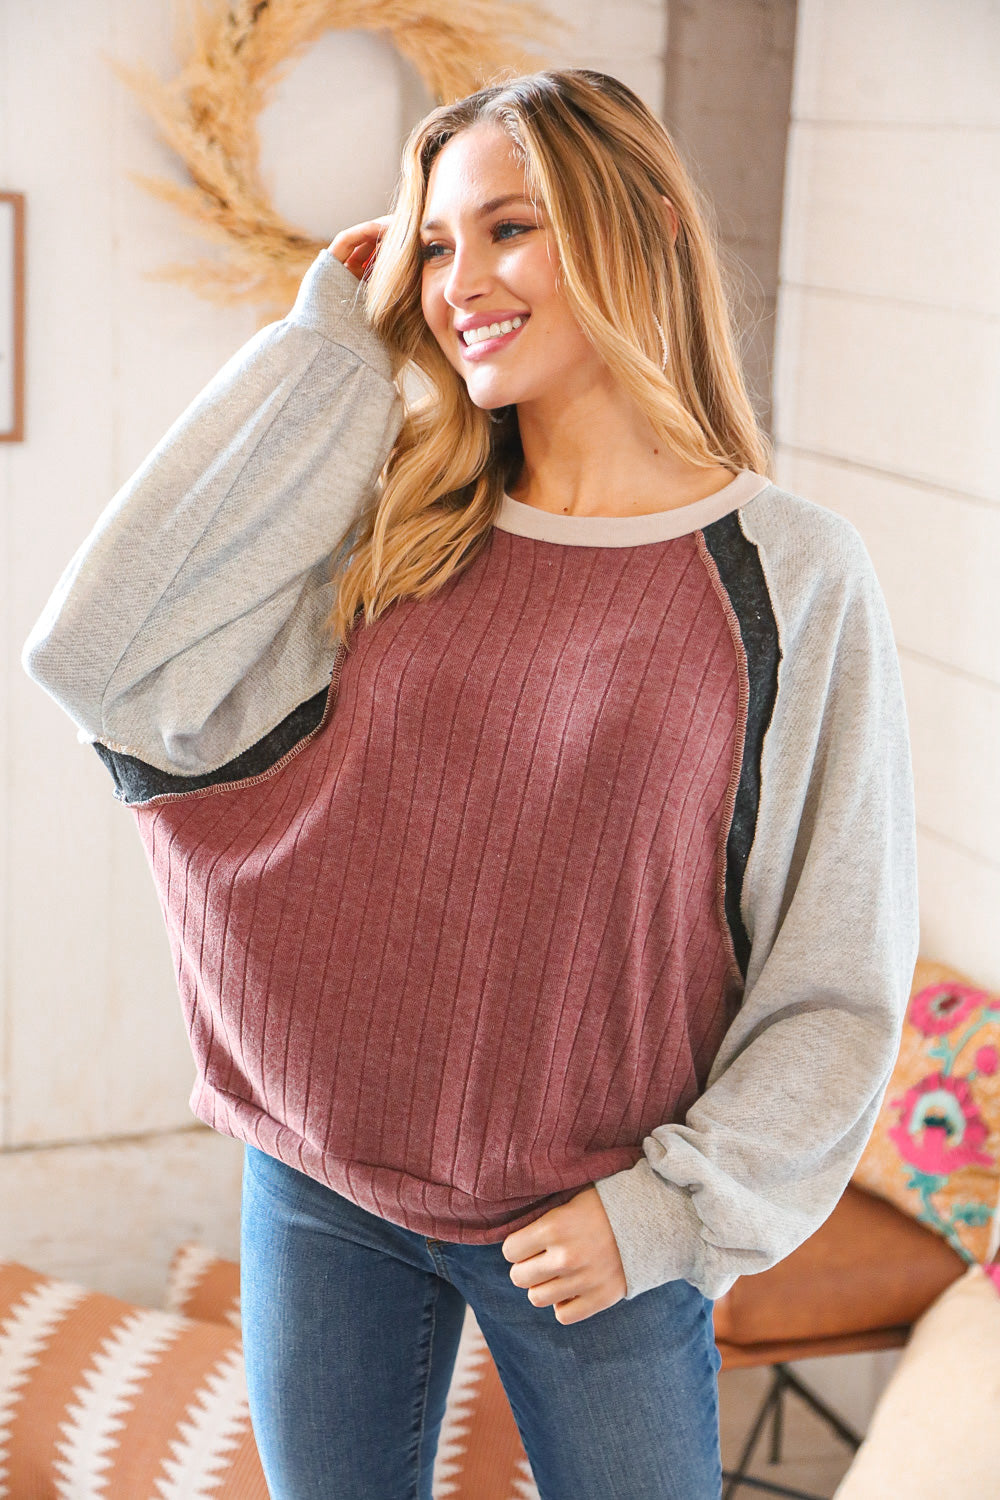 Elevated Lounging - Soft Oversized Top